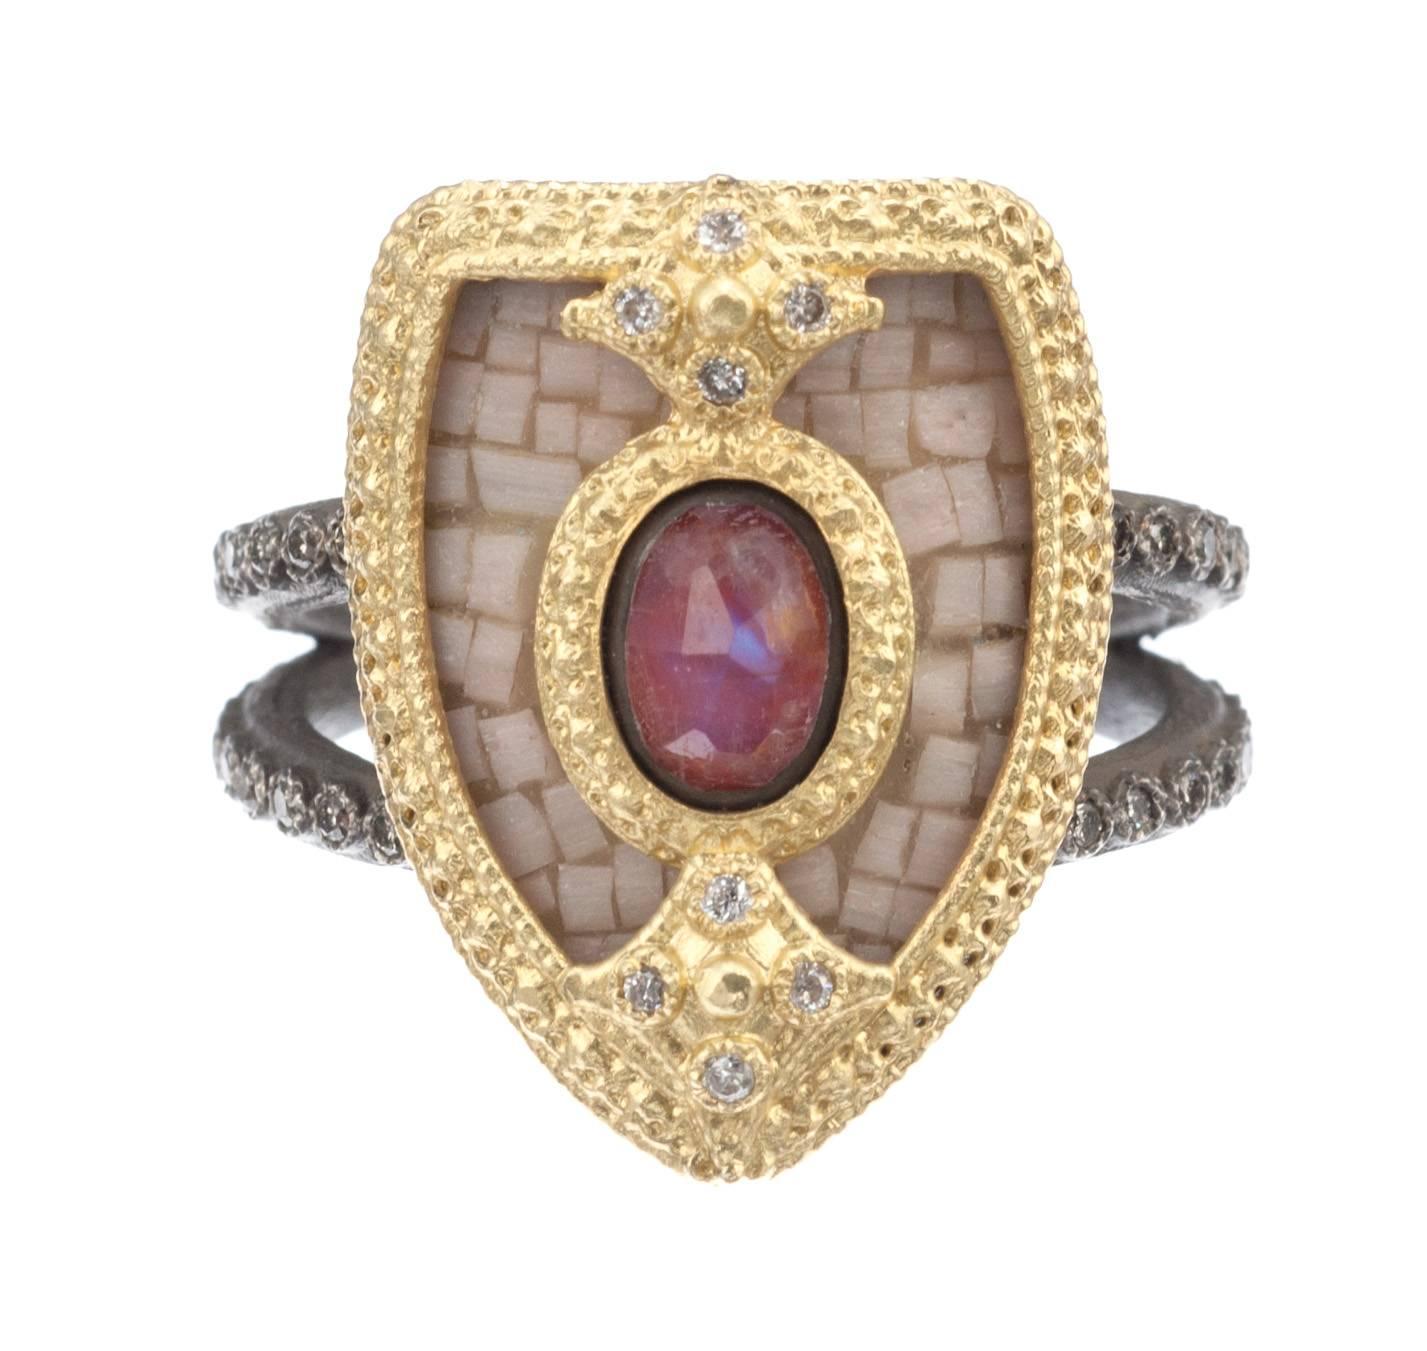 Possessed of a distinctive heraldic charm, a shield ring from Armenta’s ‘Old World’ collection. The shield is covered with a mosaic of soft white glass tiles and emblazoned with a oval doublet of rainbow moonstone and red jasper. Framing the